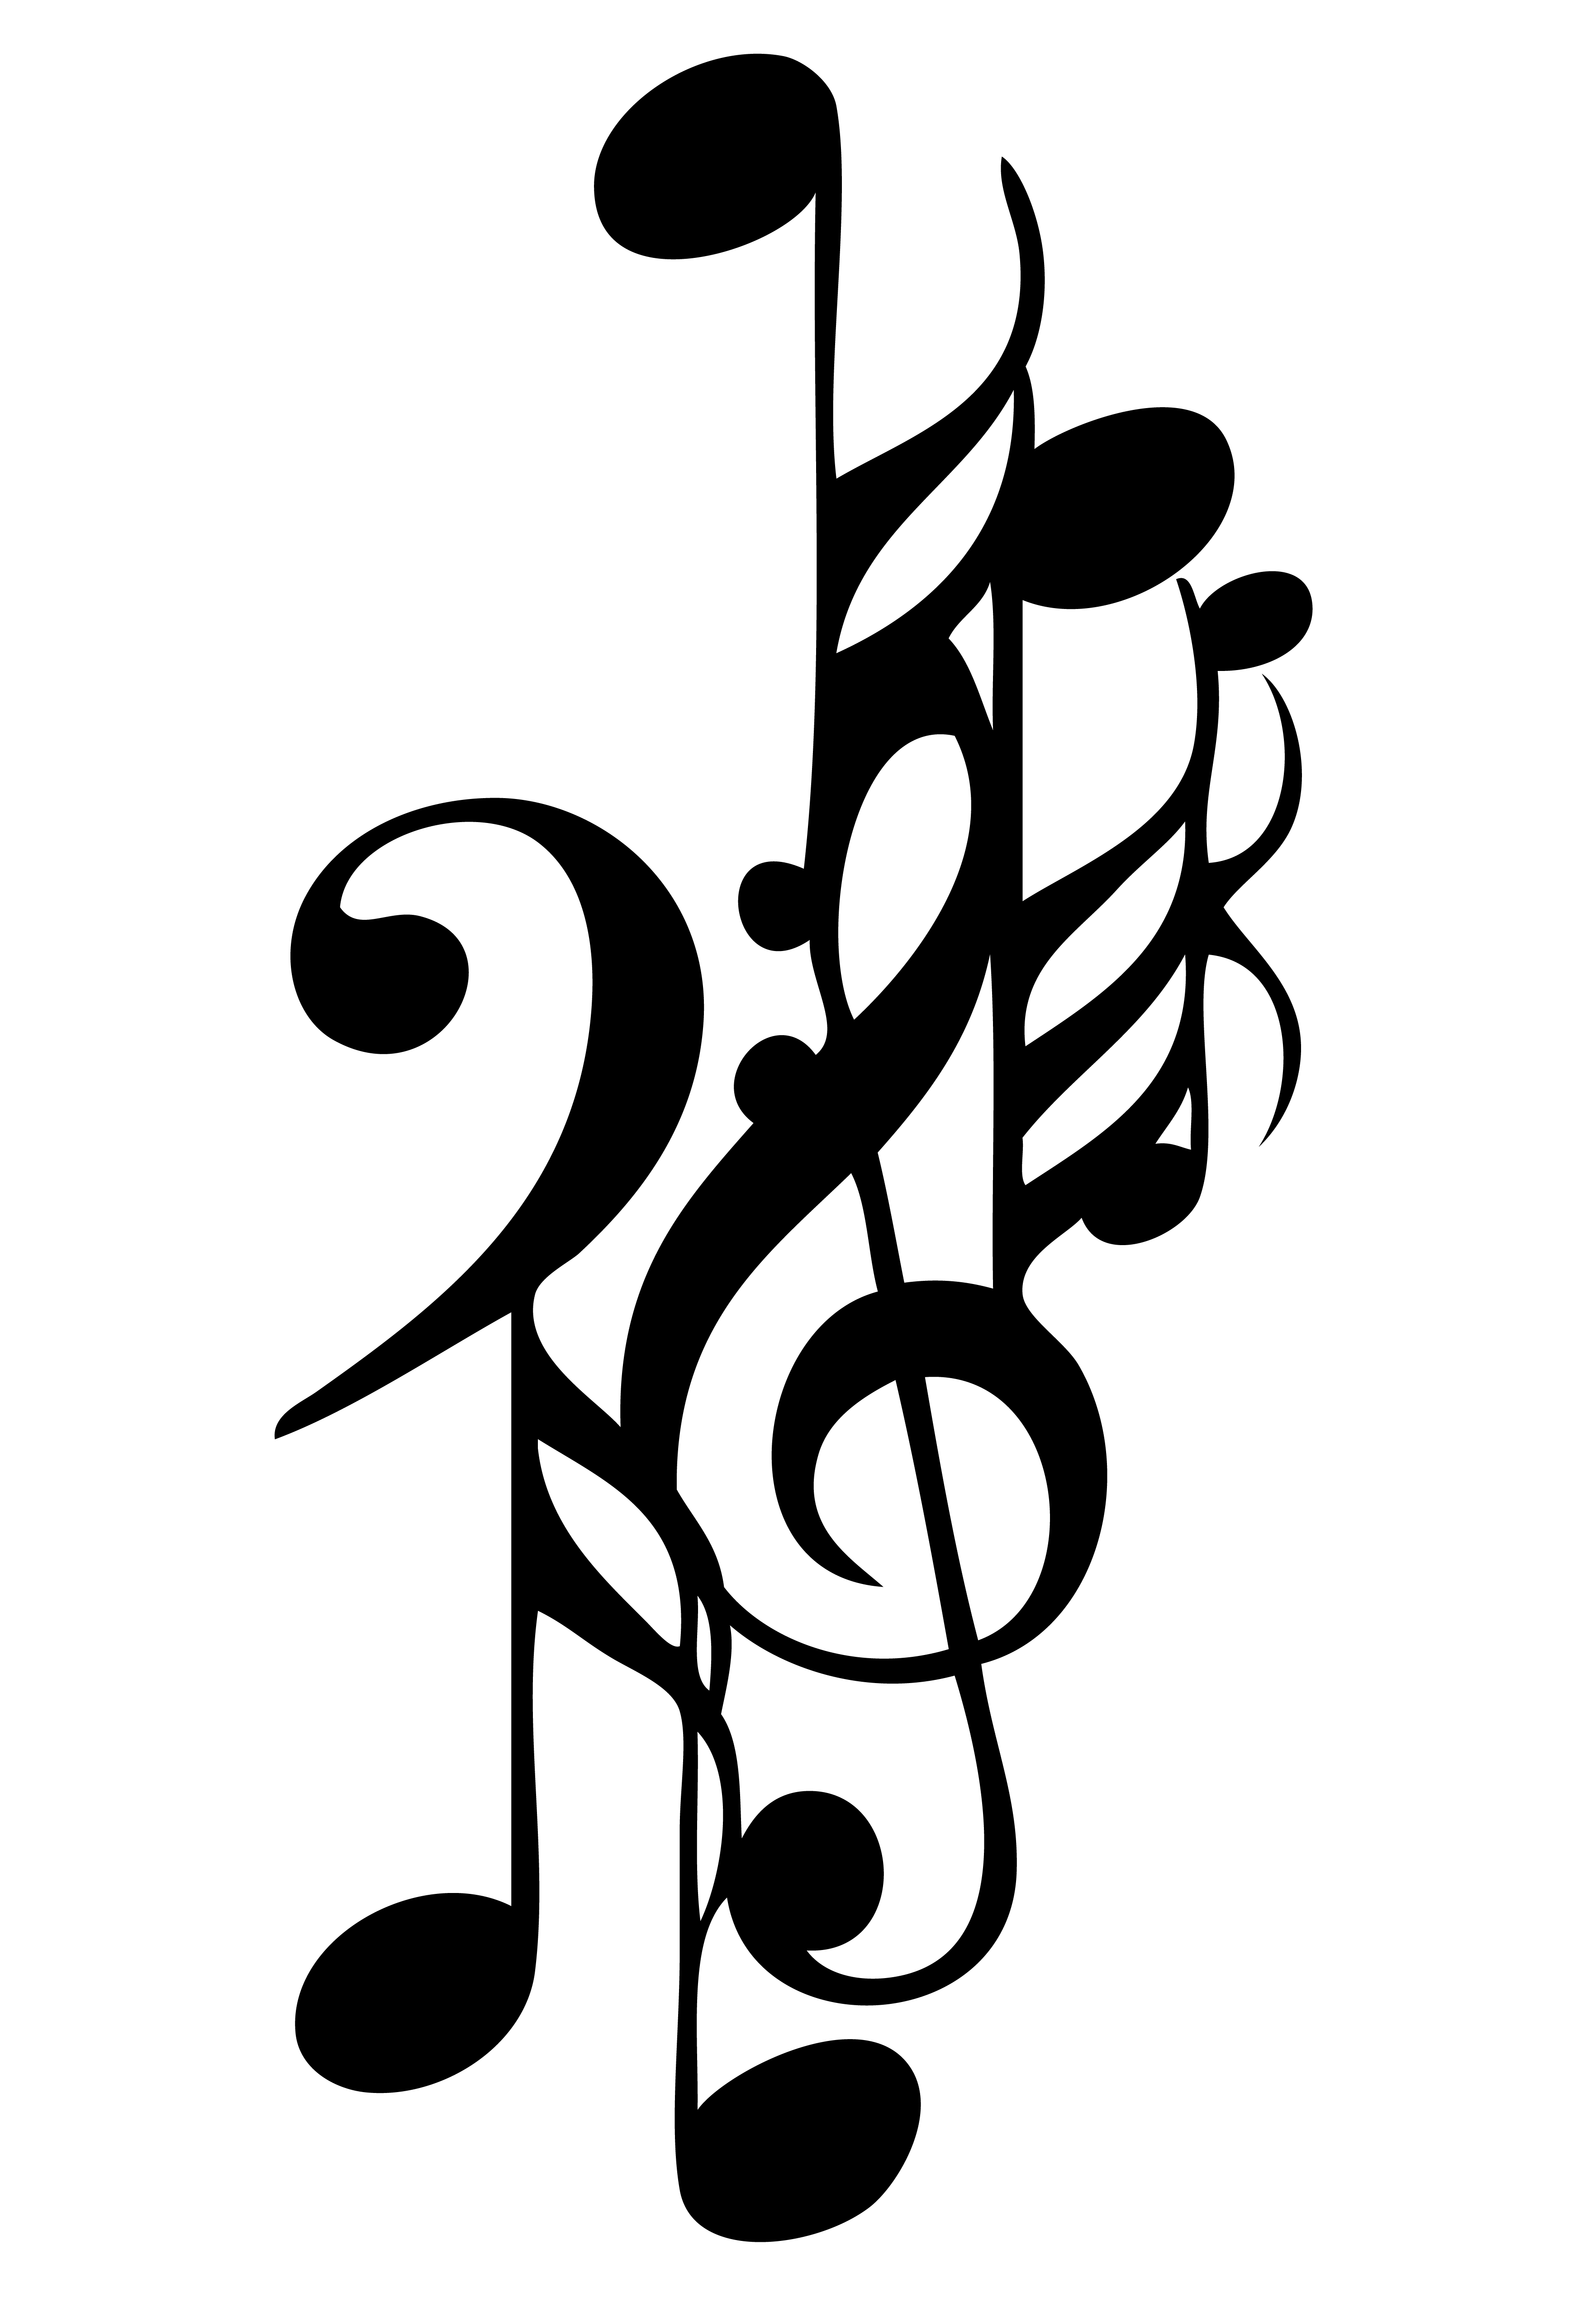 Music Note Art - Clipart library